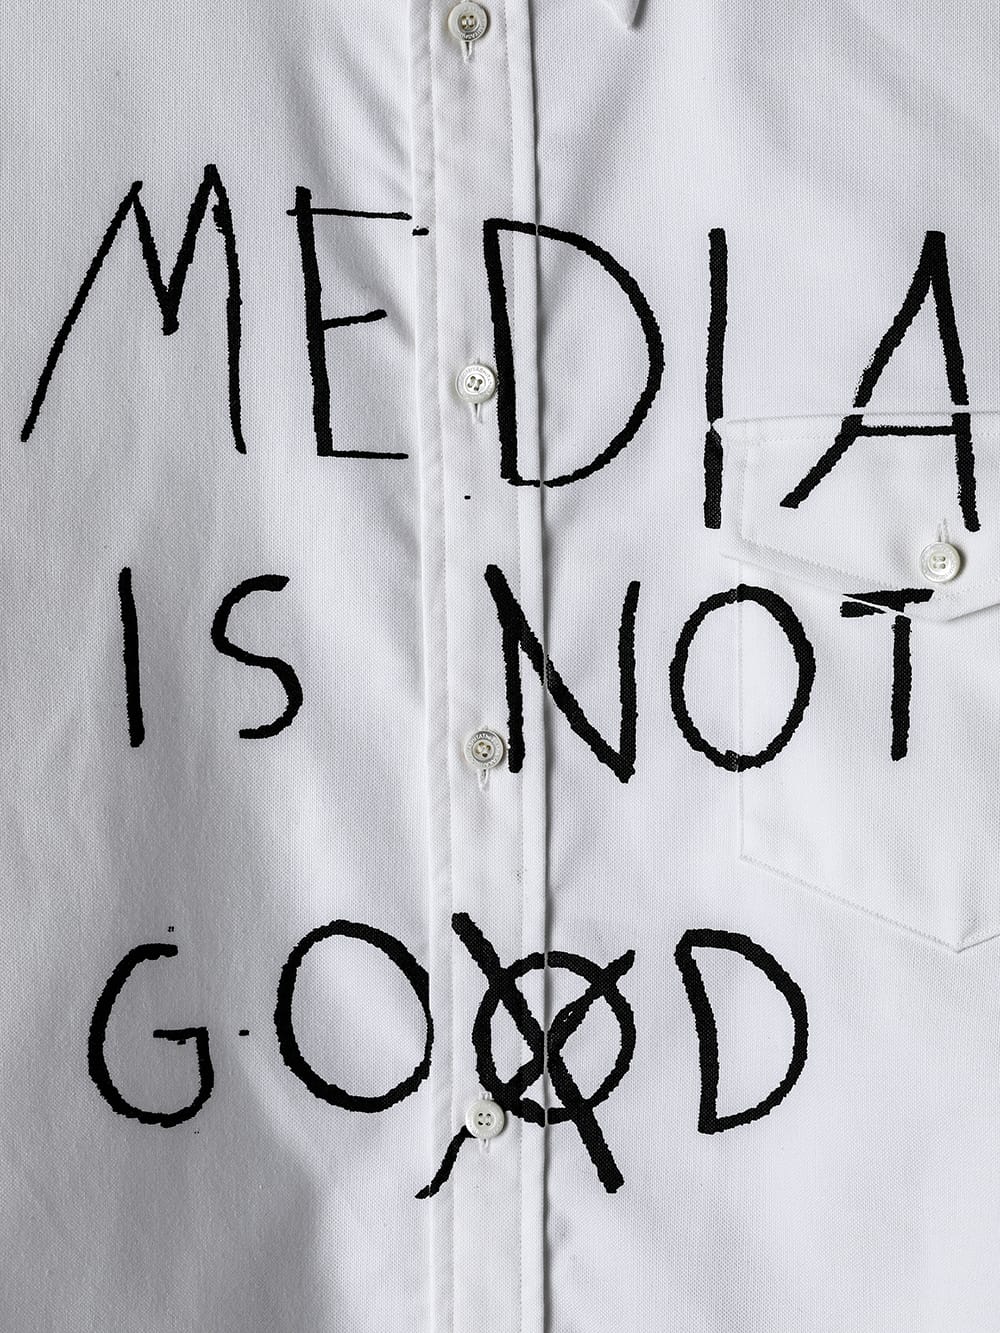 button down shirt. (media is not go⨂d.type 2)